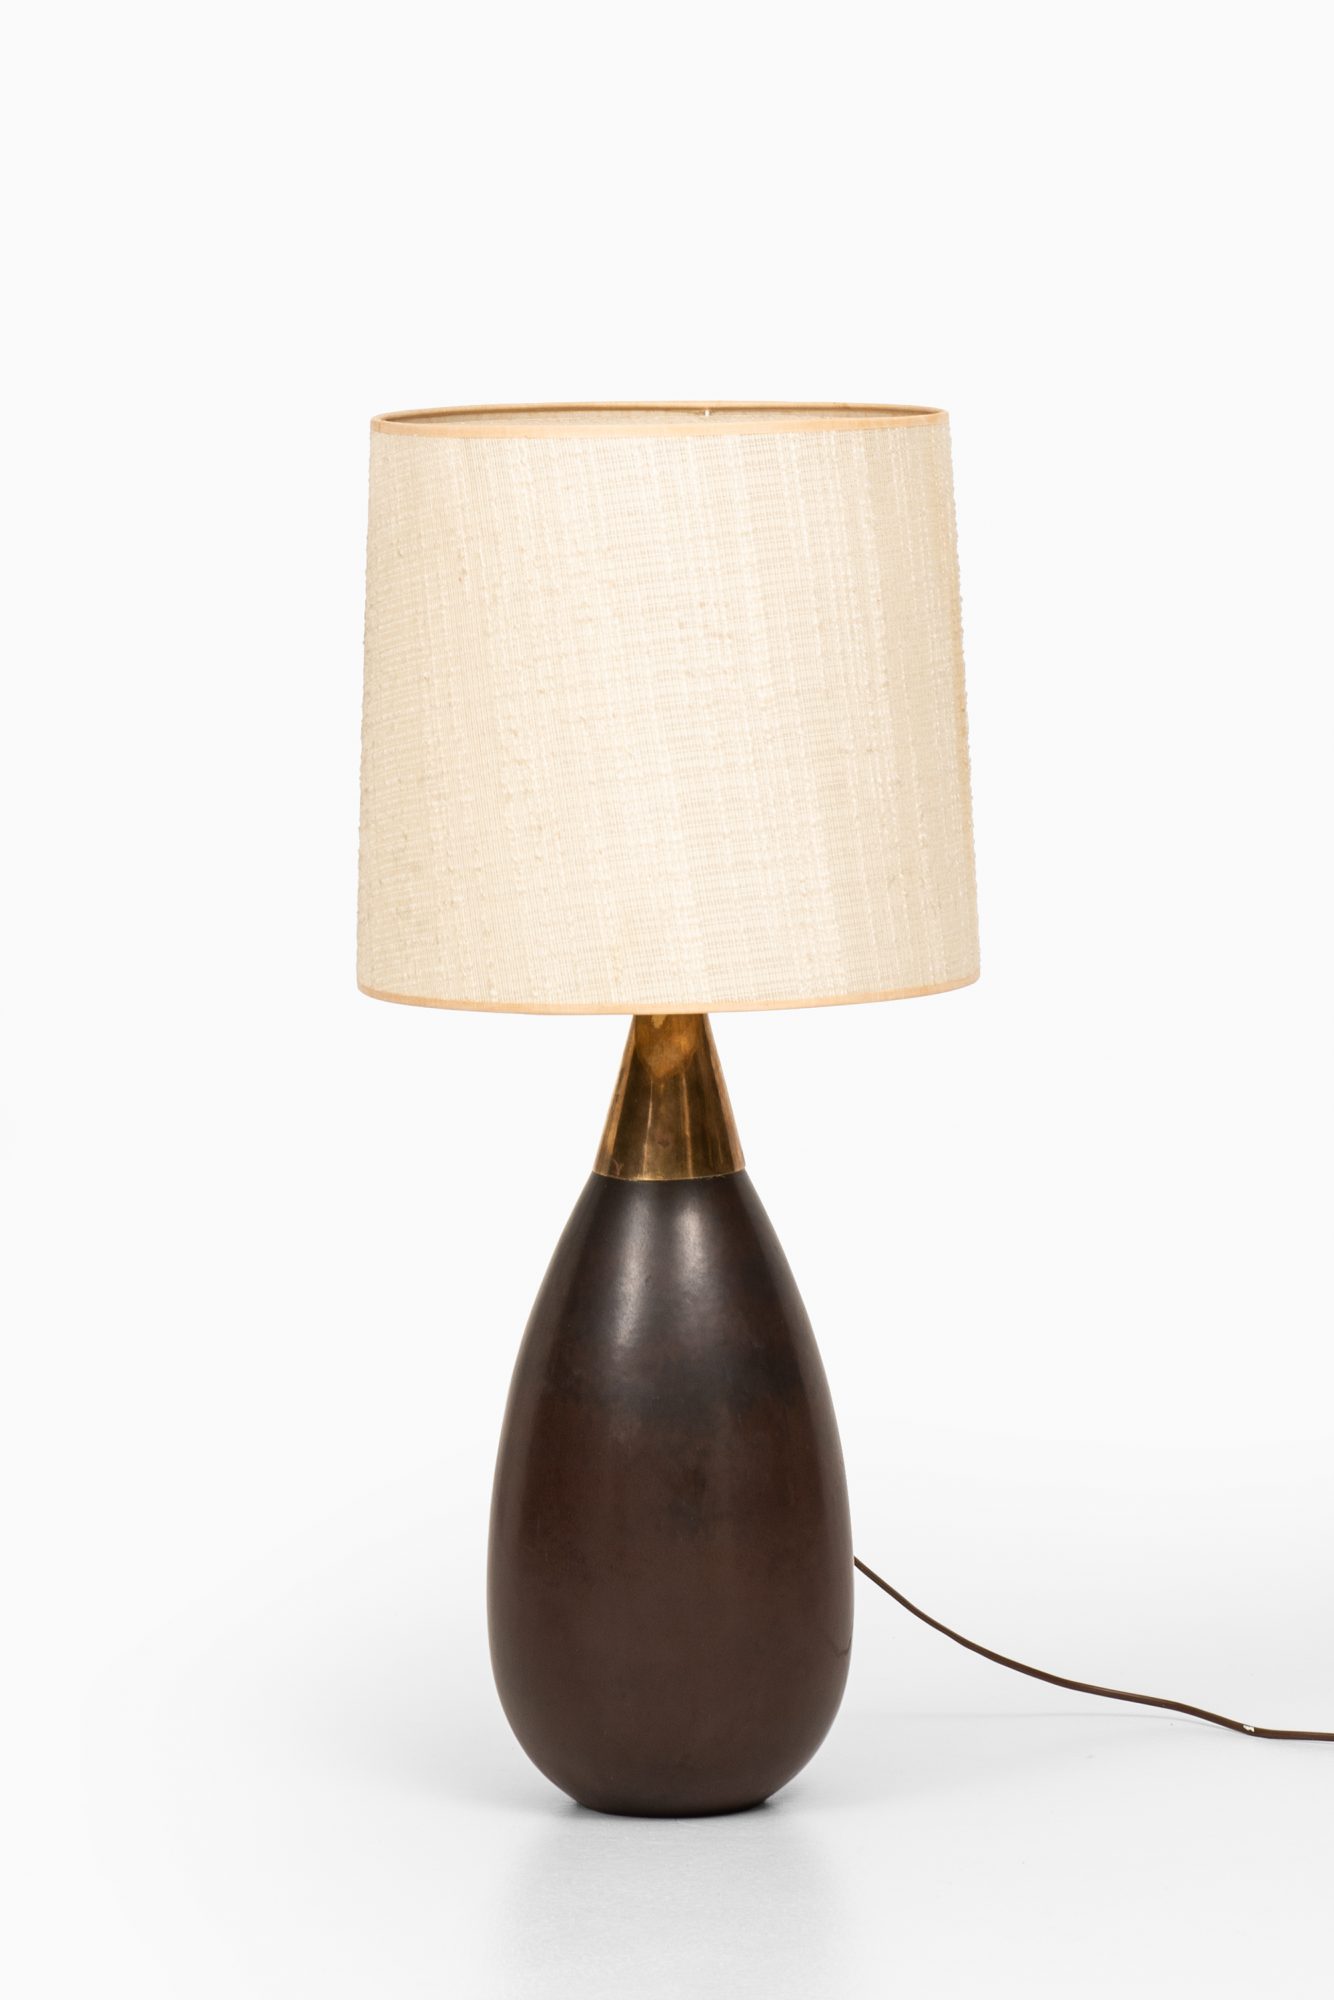 Carl-Harry Stålhane table lamp in ceramic and brass at Studio Schalling